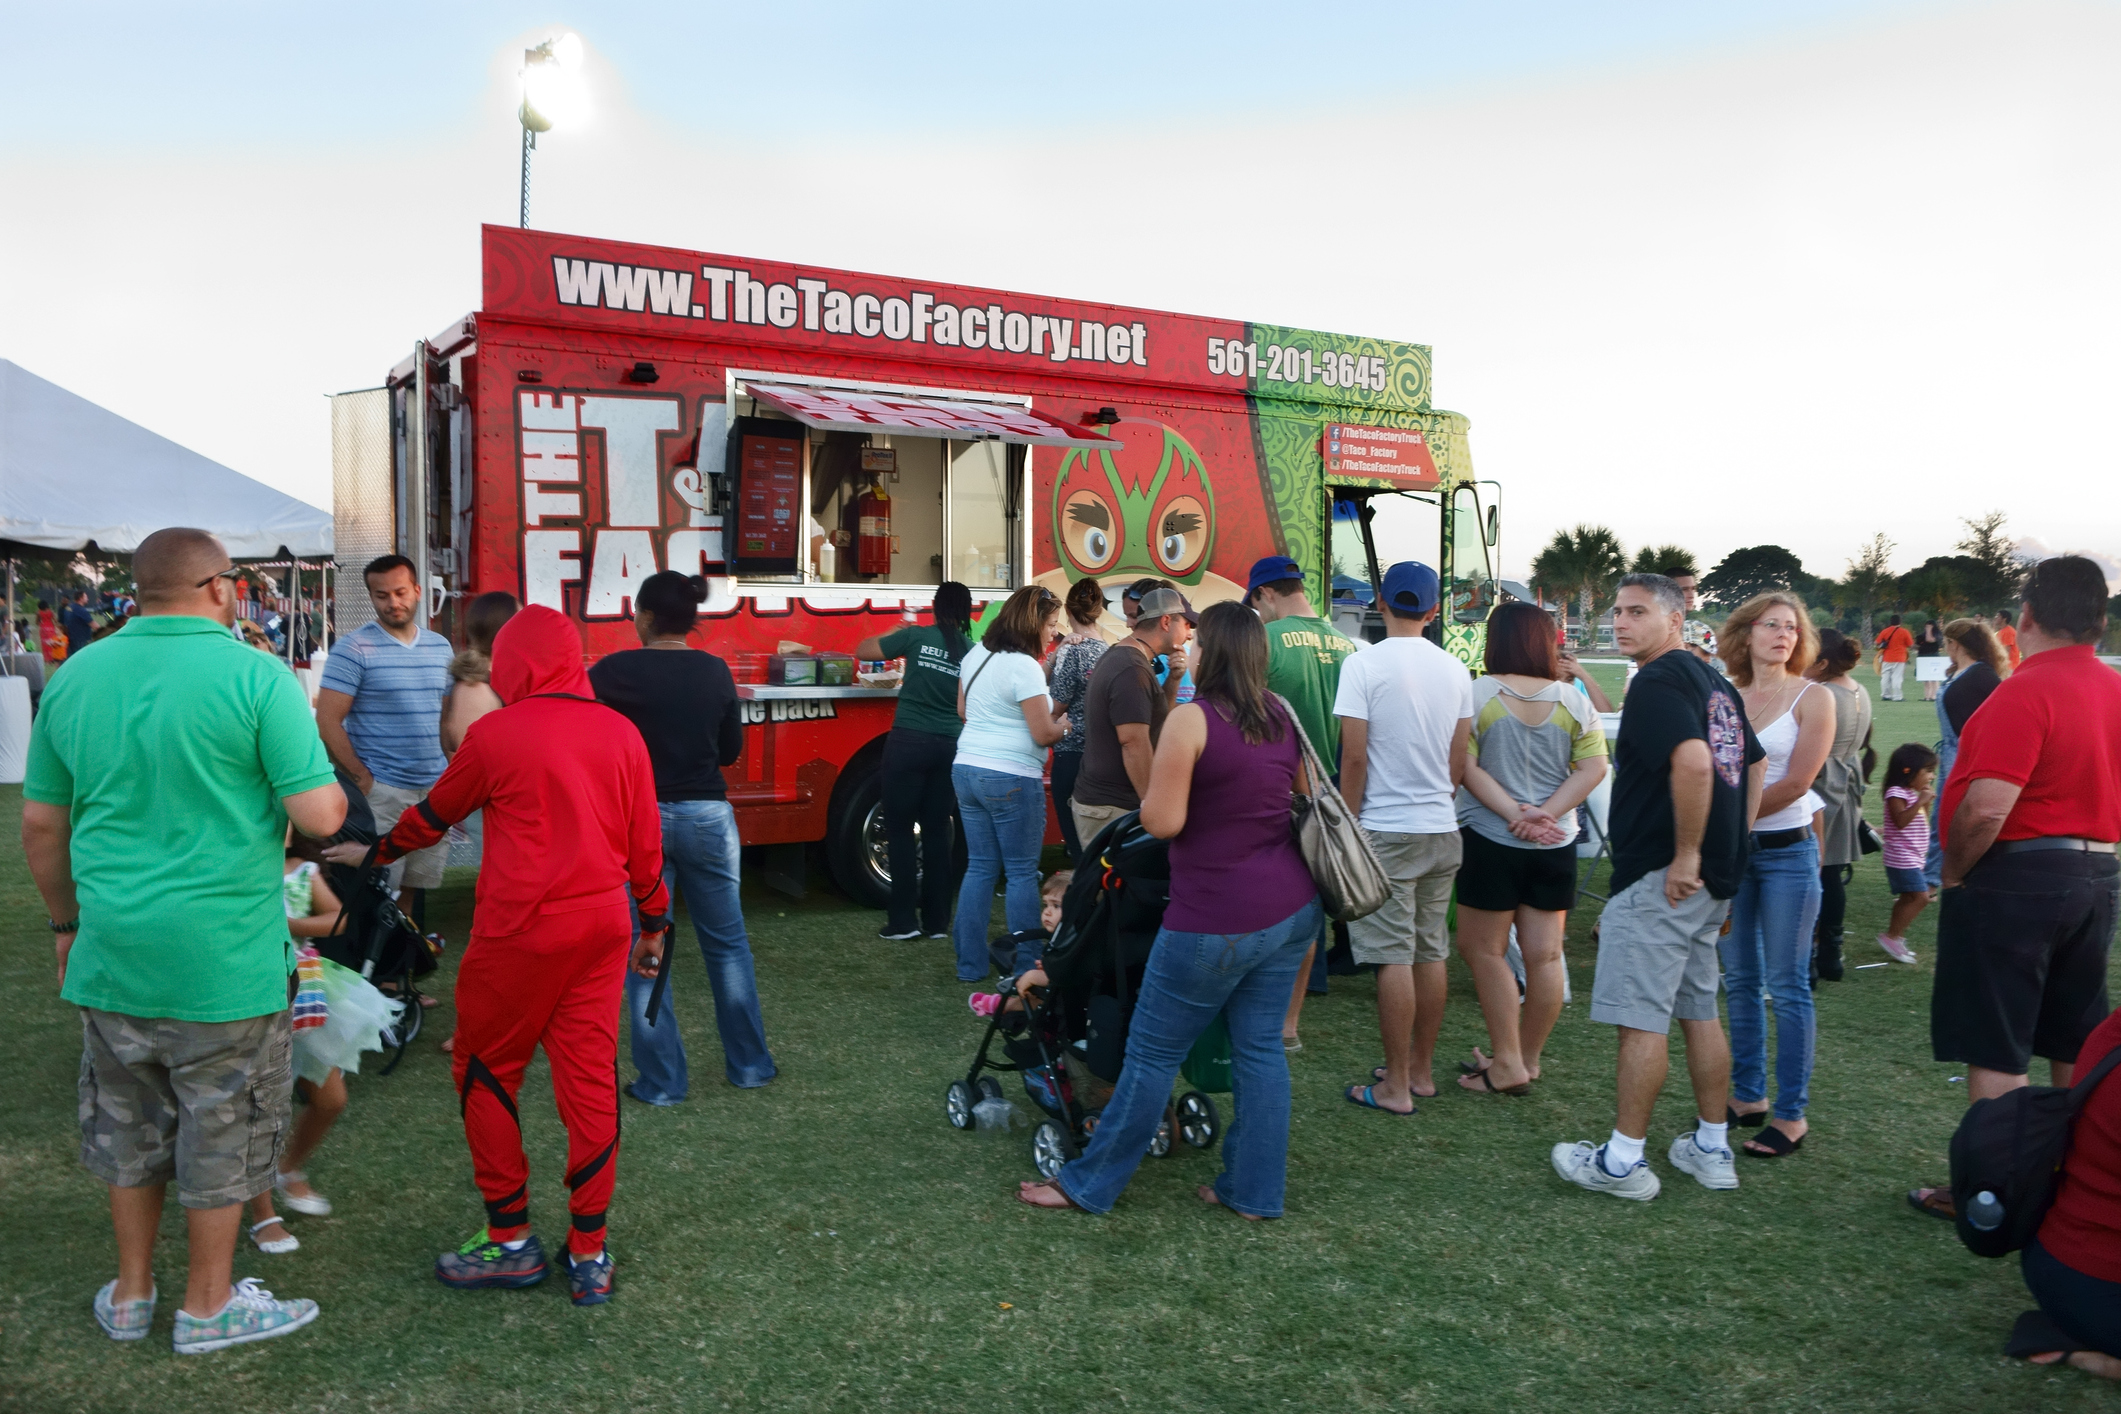 People socialize and order food in front of a Tacos Factory food truck at a public event